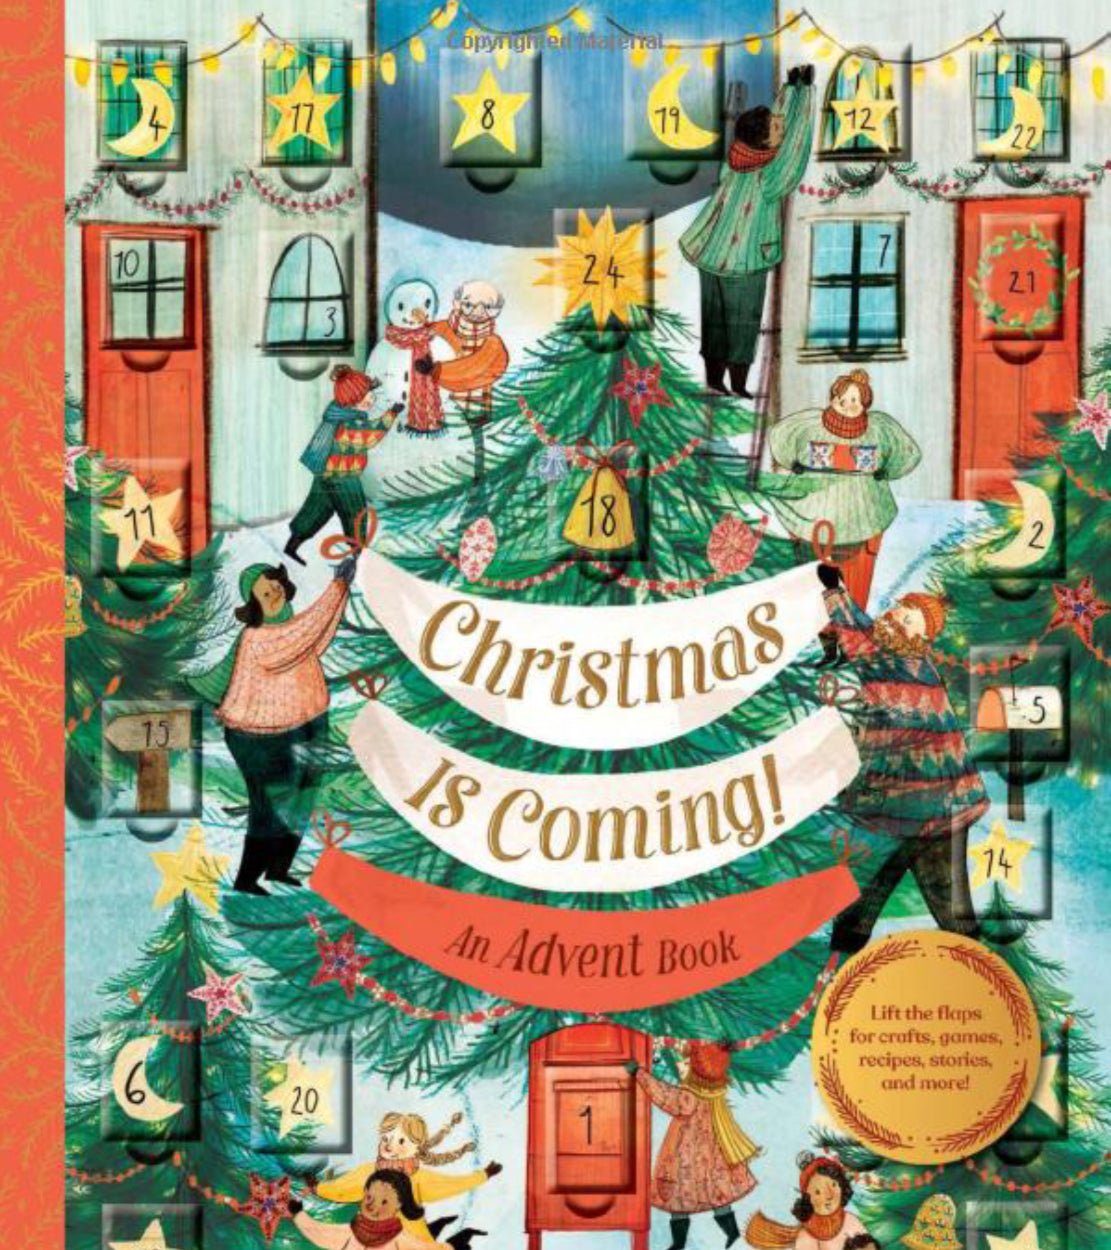 Christmas is Coming Advent Book